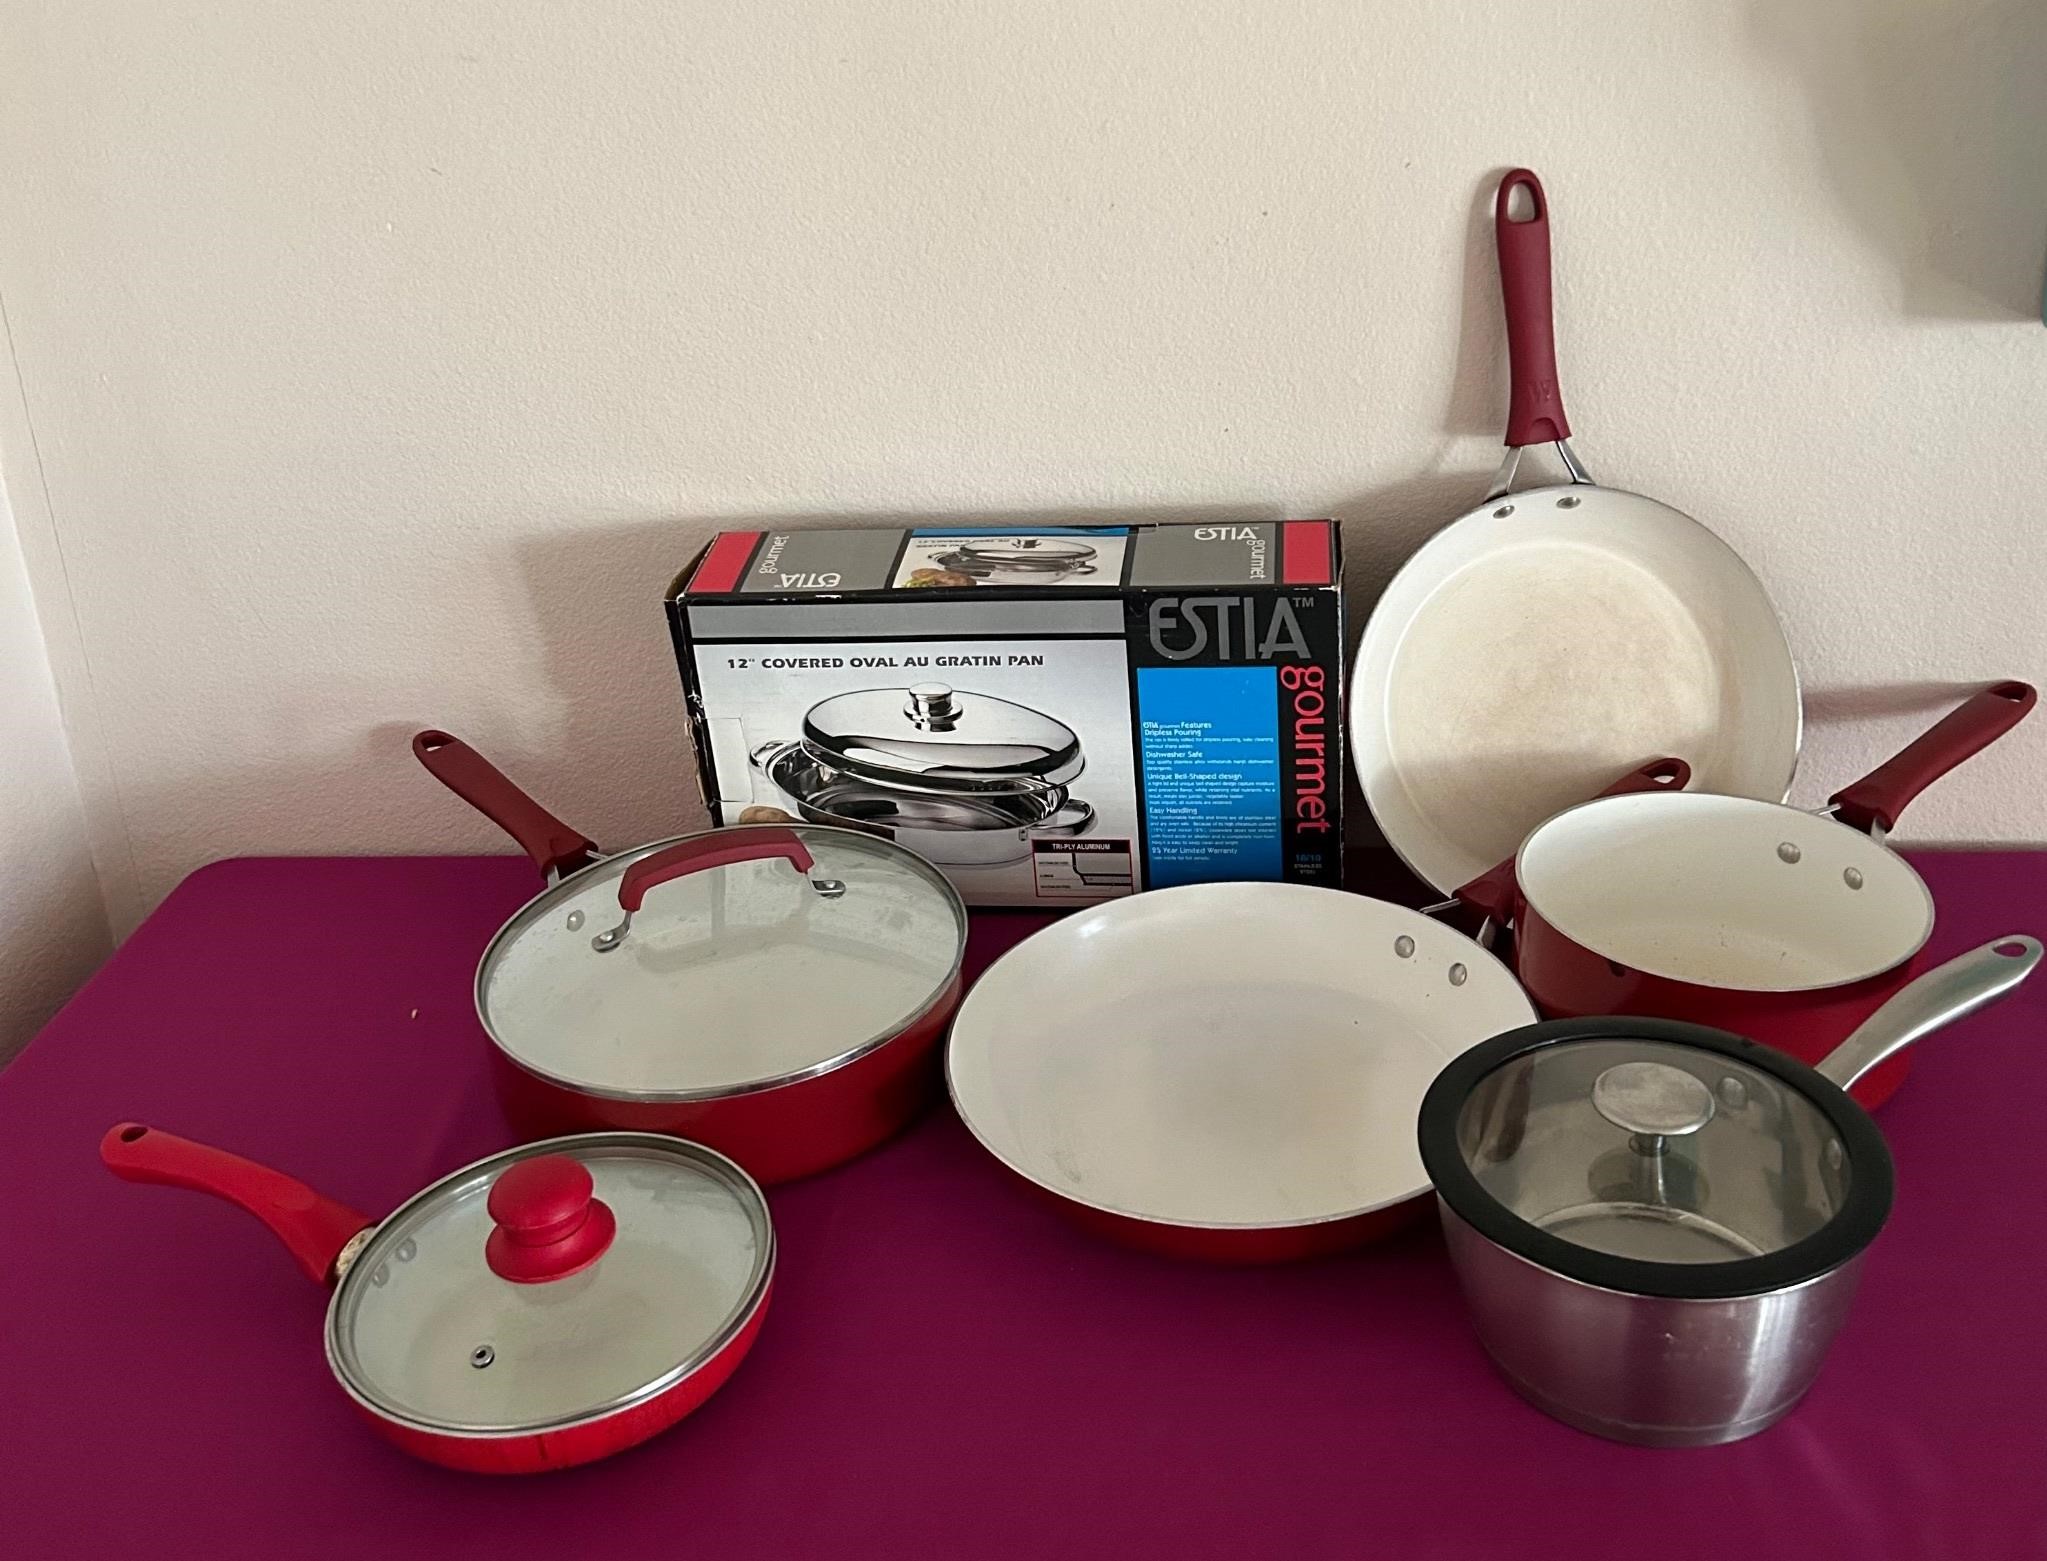 NIB 12” Covered Pan, Wearever Red Cooking Pans